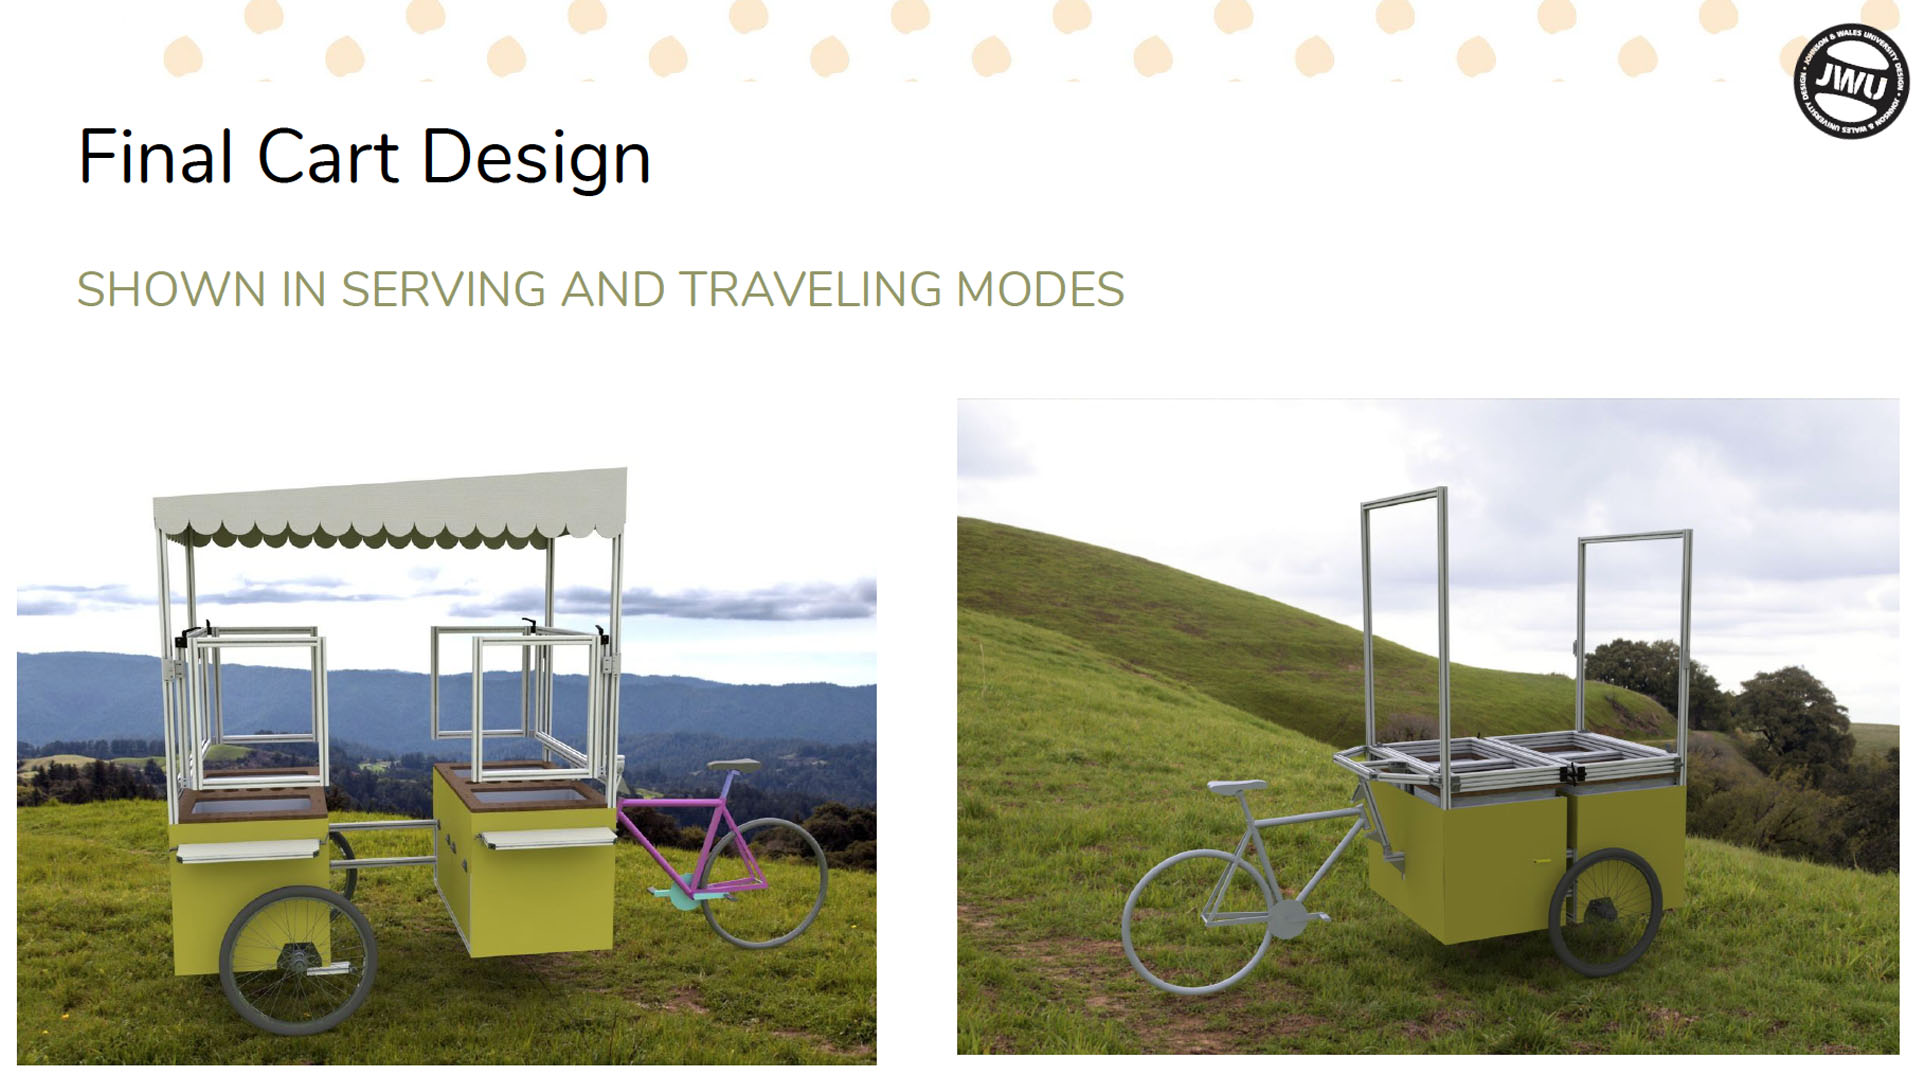 This is the final cart designs the group presented to the clients in June.